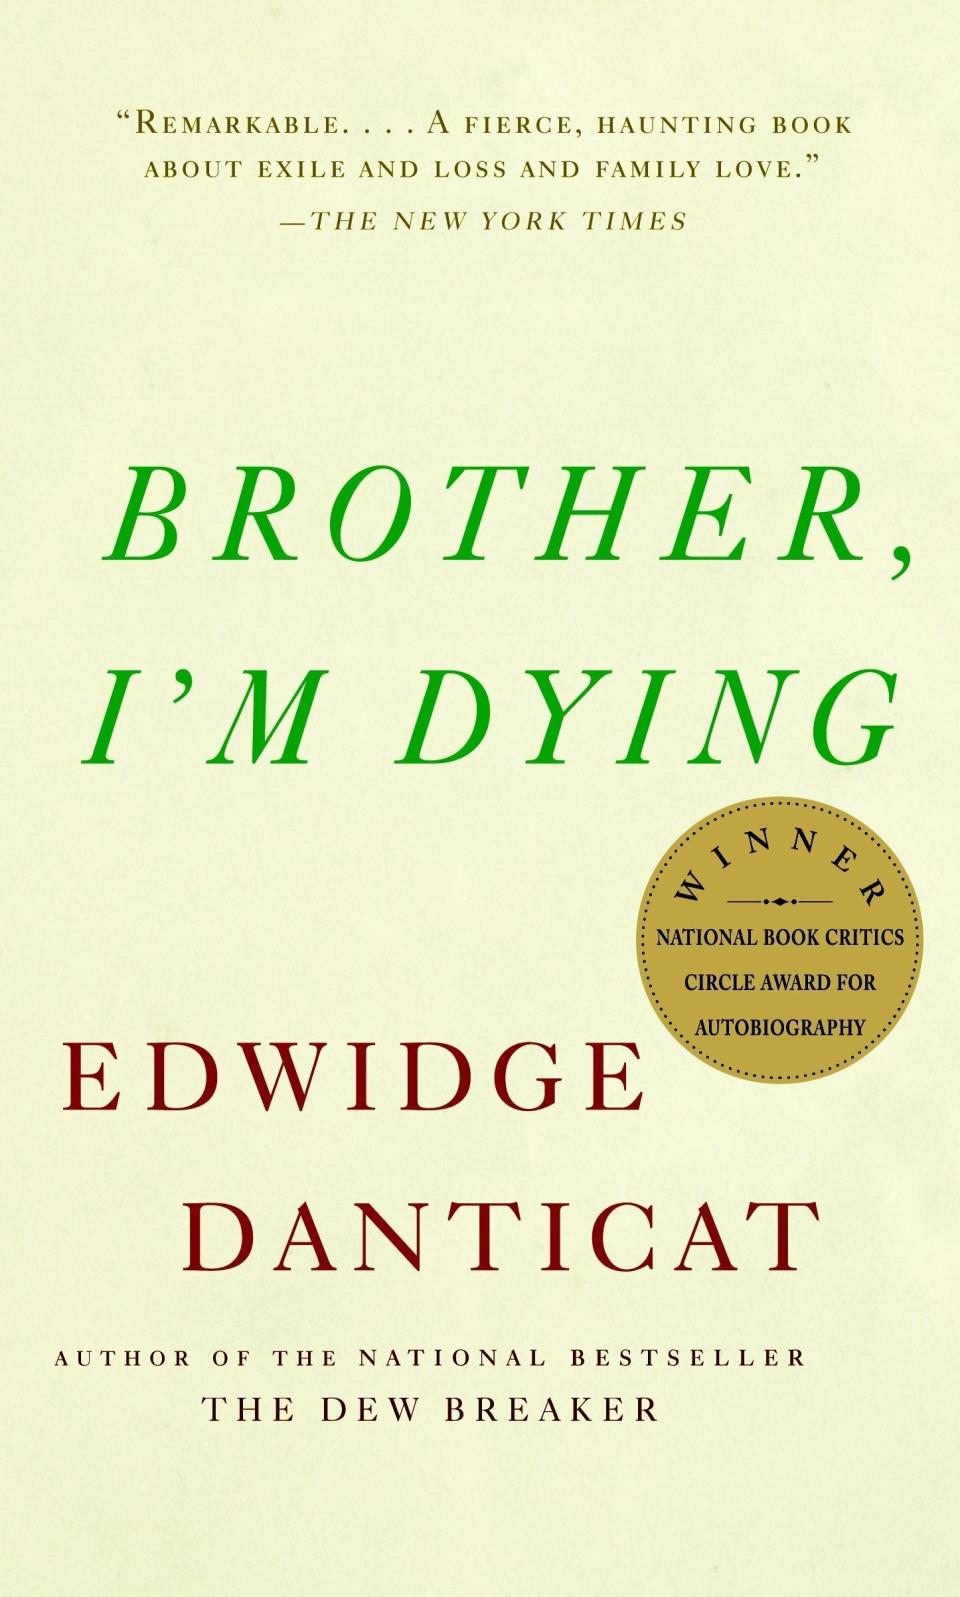 Edwidge Danticat is one of Hyppolite's favorite contemporary writers &mdash; and she especially recommends "Brother, I'm Dying," an autobiography about leaving Haiti for New York City. <br /><a href="https://amzn.to/3hlQfcc" target="_blank" rel="noopener noreferrer"><br />Find it on Amazon</a>.